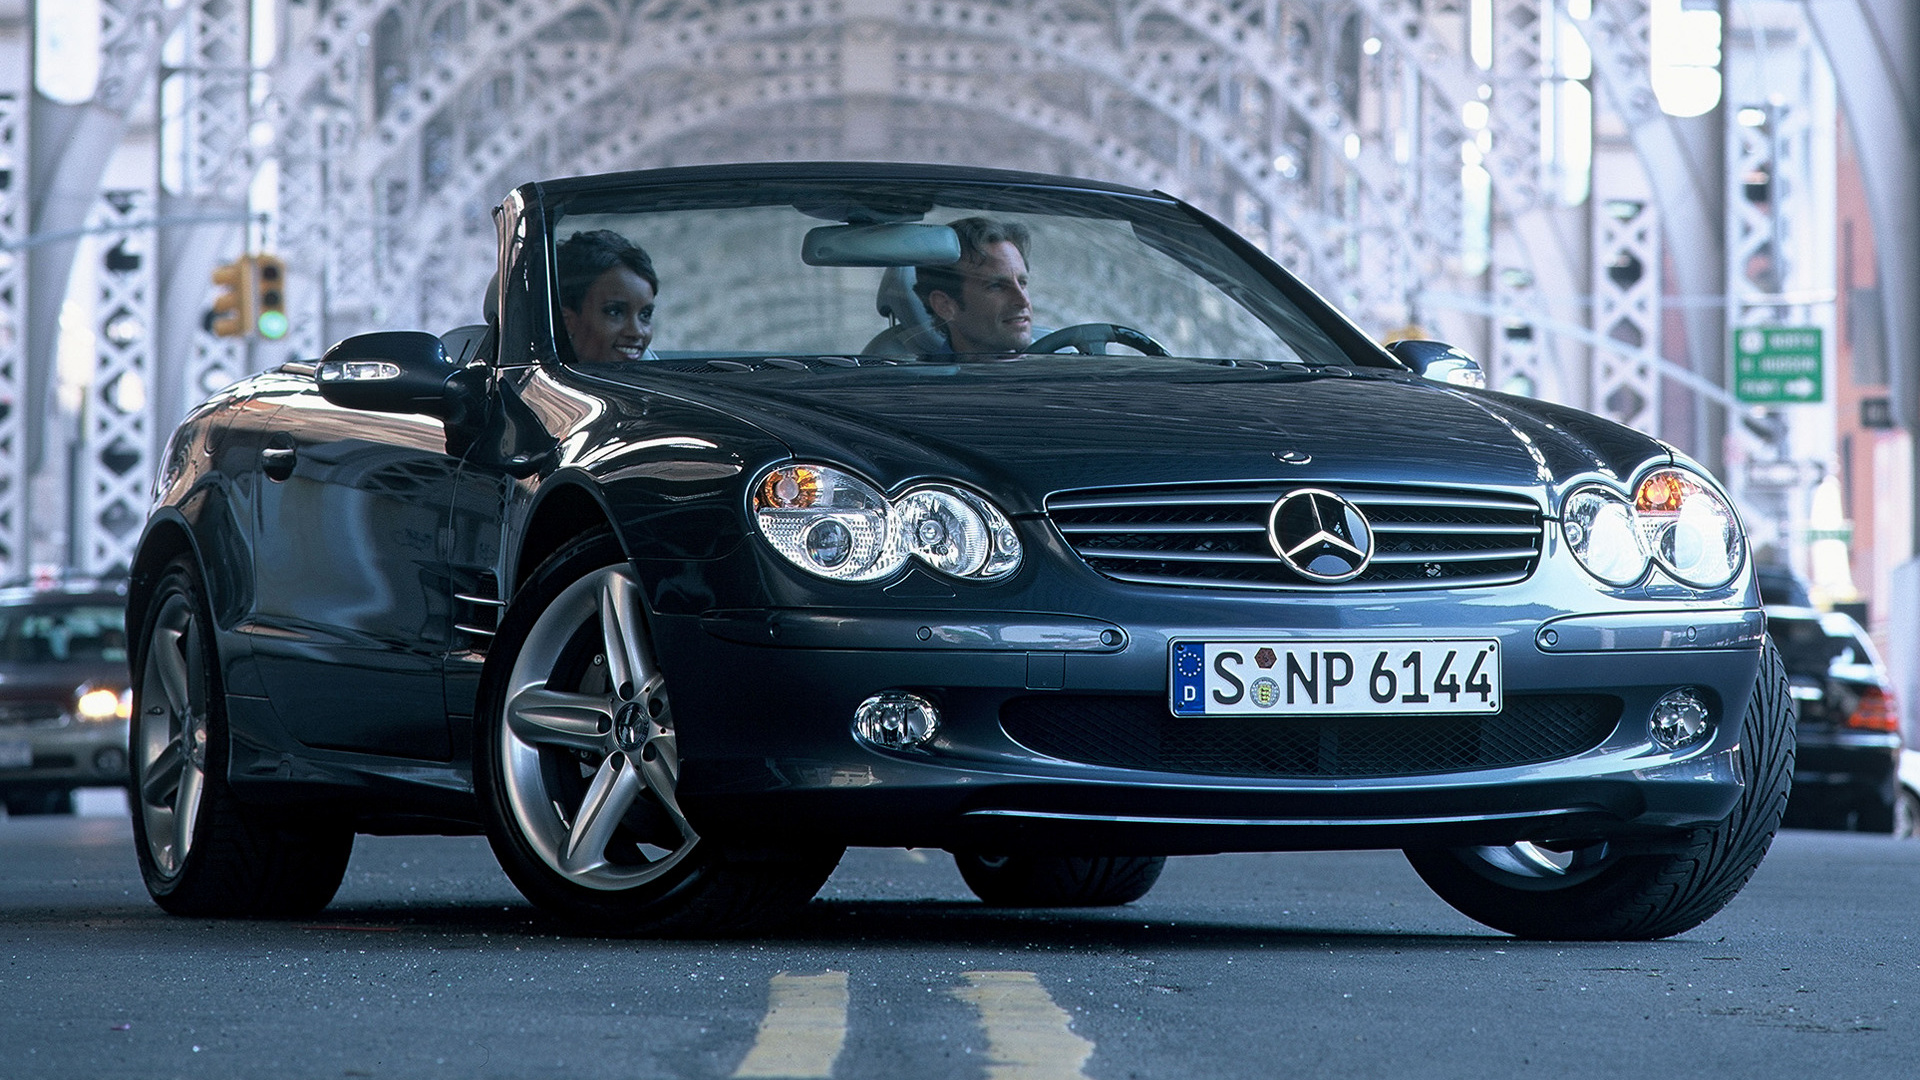 2001 Mercedes-Benz SL-Class - Wallpapers and HD Images ...